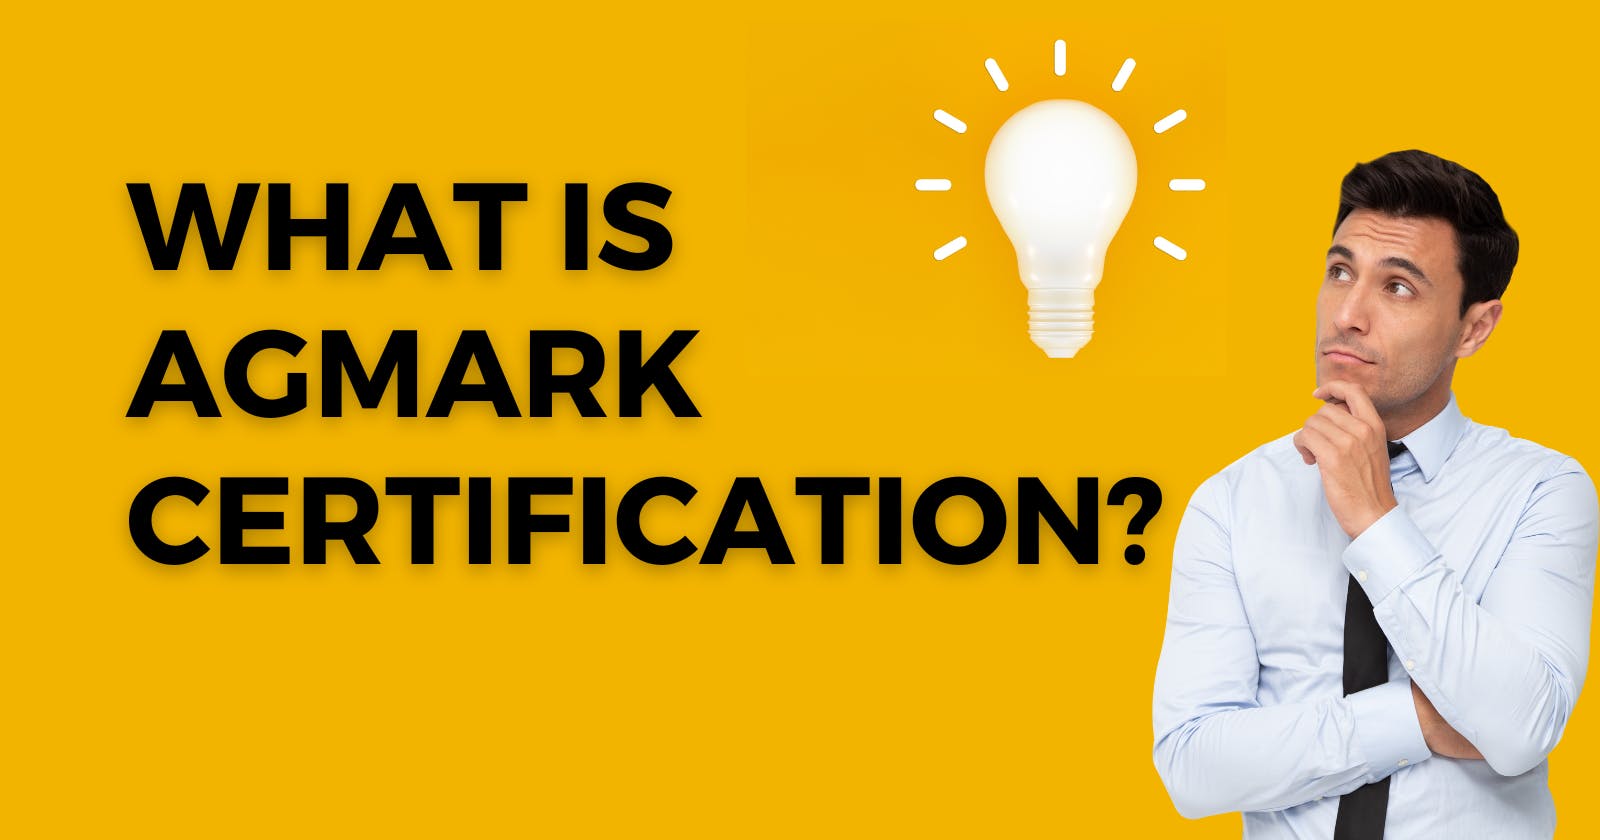 What is Agmark Certification?